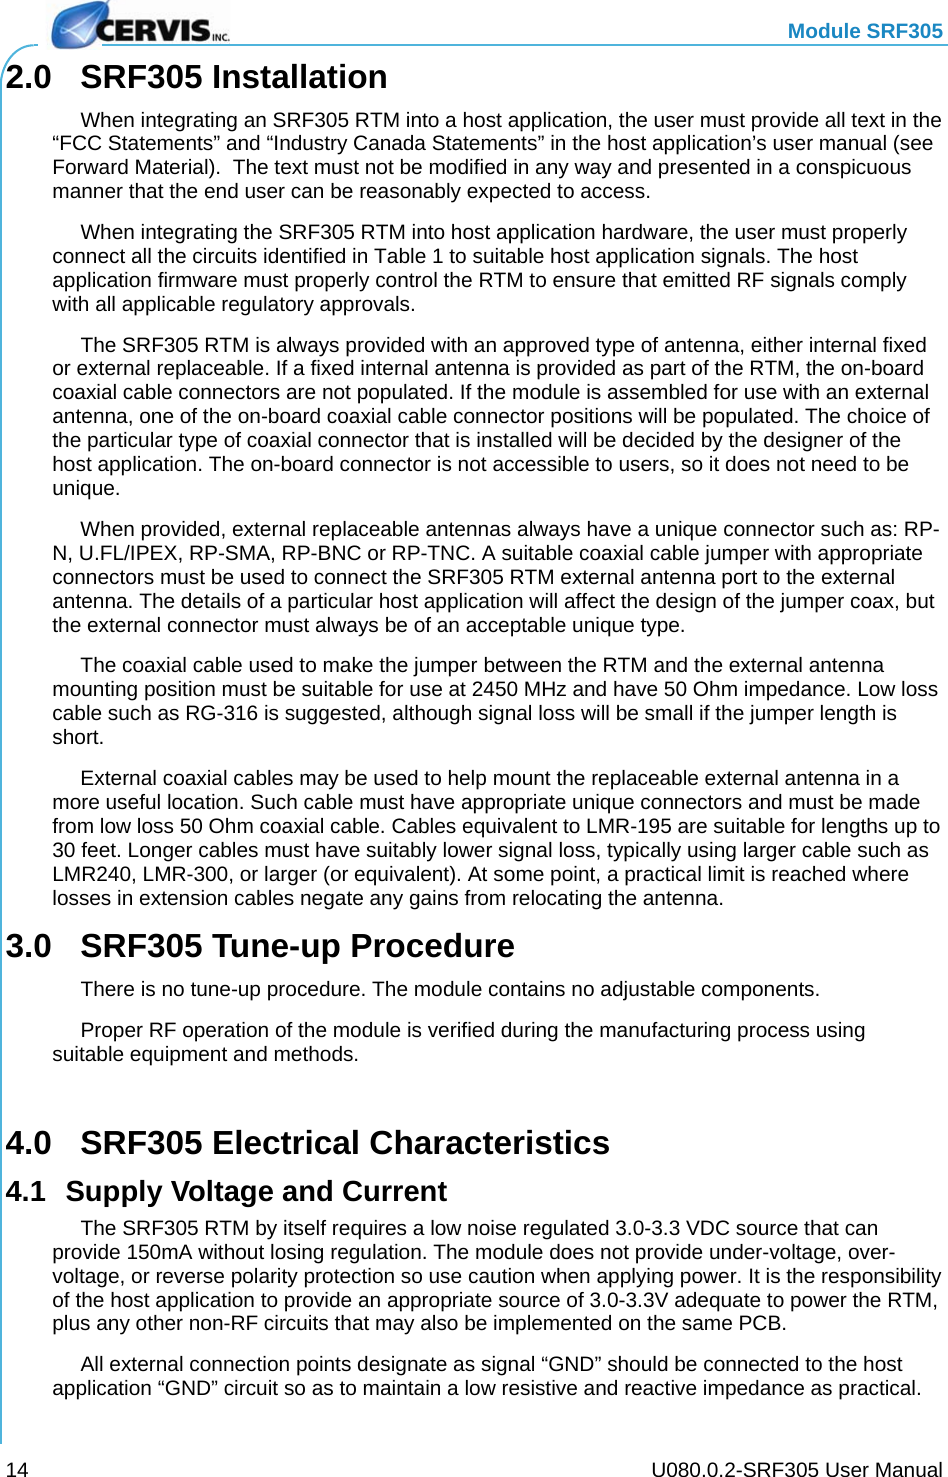   Module SRF305     U080.0.2-SRF305 User Manual 14 2.0 SRF305 Installation   When integrating an SRF305 RTM into a host application, the user must provide all text in the “FCC Statements” and “Industry Canada Statements” in the host application’s user manual (see Forward Material).  The text must not be modified in any way and presented in a conspicuous manner that the end user can be reasonably expected to access.   When integrating the SRF305 RTM into host application hardware, the user must properly connect all the circuits identified in Table 1 to suitable host application signals. The host application firmware must properly control the RTM to ensure that emitted RF signals comply with all applicable regulatory approvals.   The SRF305 RTM is always provided with an approved type of antenna, either internal fixed or external replaceable. If a fixed internal antenna is provided as part of the RTM, the on-board coaxial cable connectors are not populated. If the module is assembled for use with an external antenna, one of the on-board coaxial cable connector positions will be populated. The choice of the particular type of coaxial connector that is installed will be decided by the designer of the host application. The on-board connector is not accessible to users, so it does not need to be unique. When provided, external replaceable antennas always have a unique connector such as: RP-N, U.FL/IPEX, RP-SMA, RP-BNC or RP-TNC. A suitable coaxial cable jumper with appropriate connectors must be used to connect the SRF305 RTM external antenna port to the external antenna. The details of a particular host application will affect the design of the jumper coax, but the external connector must always be of an acceptable unique type. The coaxial cable used to make the jumper between the RTM and the external antenna mounting position must be suitable for use at 2450 MHz and have 50 Ohm impedance. Low loss cable such as RG-316 is suggested, although signal loss will be small if the jumper length is short. External coaxial cables may be used to help mount the replaceable external antenna in a more useful location. Such cable must have appropriate unique connectors and must be made from low loss 50 Ohm coaxial cable. Cables equivalent to LMR-195 are suitable for lengths up to 30 feet. Longer cables must have suitably lower signal loss, typically using larger cable such as LMR240, LMR-300, or larger (or equivalent). At some point, a practical limit is reached where losses in extension cables negate any gains from relocating the antenna. 3.0  SRF305 Tune-up Procedure   There is no tune-up procedure. The module contains no adjustable components.   Proper RF operation of the module is verified during the manufacturing process using suitable equipment and methods.  4.0  SRF305 Electrical Characteristics 4.1  Supply Voltage and Current   The SRF305 RTM by itself requires a low noise regulated 3.0-3.3 VDC source that can provide 150mA without losing regulation. The module does not provide under-voltage, over-voltage, or reverse polarity protection so use caution when applying power. It is the responsibility of the host application to provide an appropriate source of 3.0-3.3V adequate to power the RTM, plus any other non-RF circuits that may also be implemented on the same PCB.   All external connection points designate as signal “GND” should be connected to the host application “GND” circuit so as to maintain a low resistive and reactive impedance as practical. 